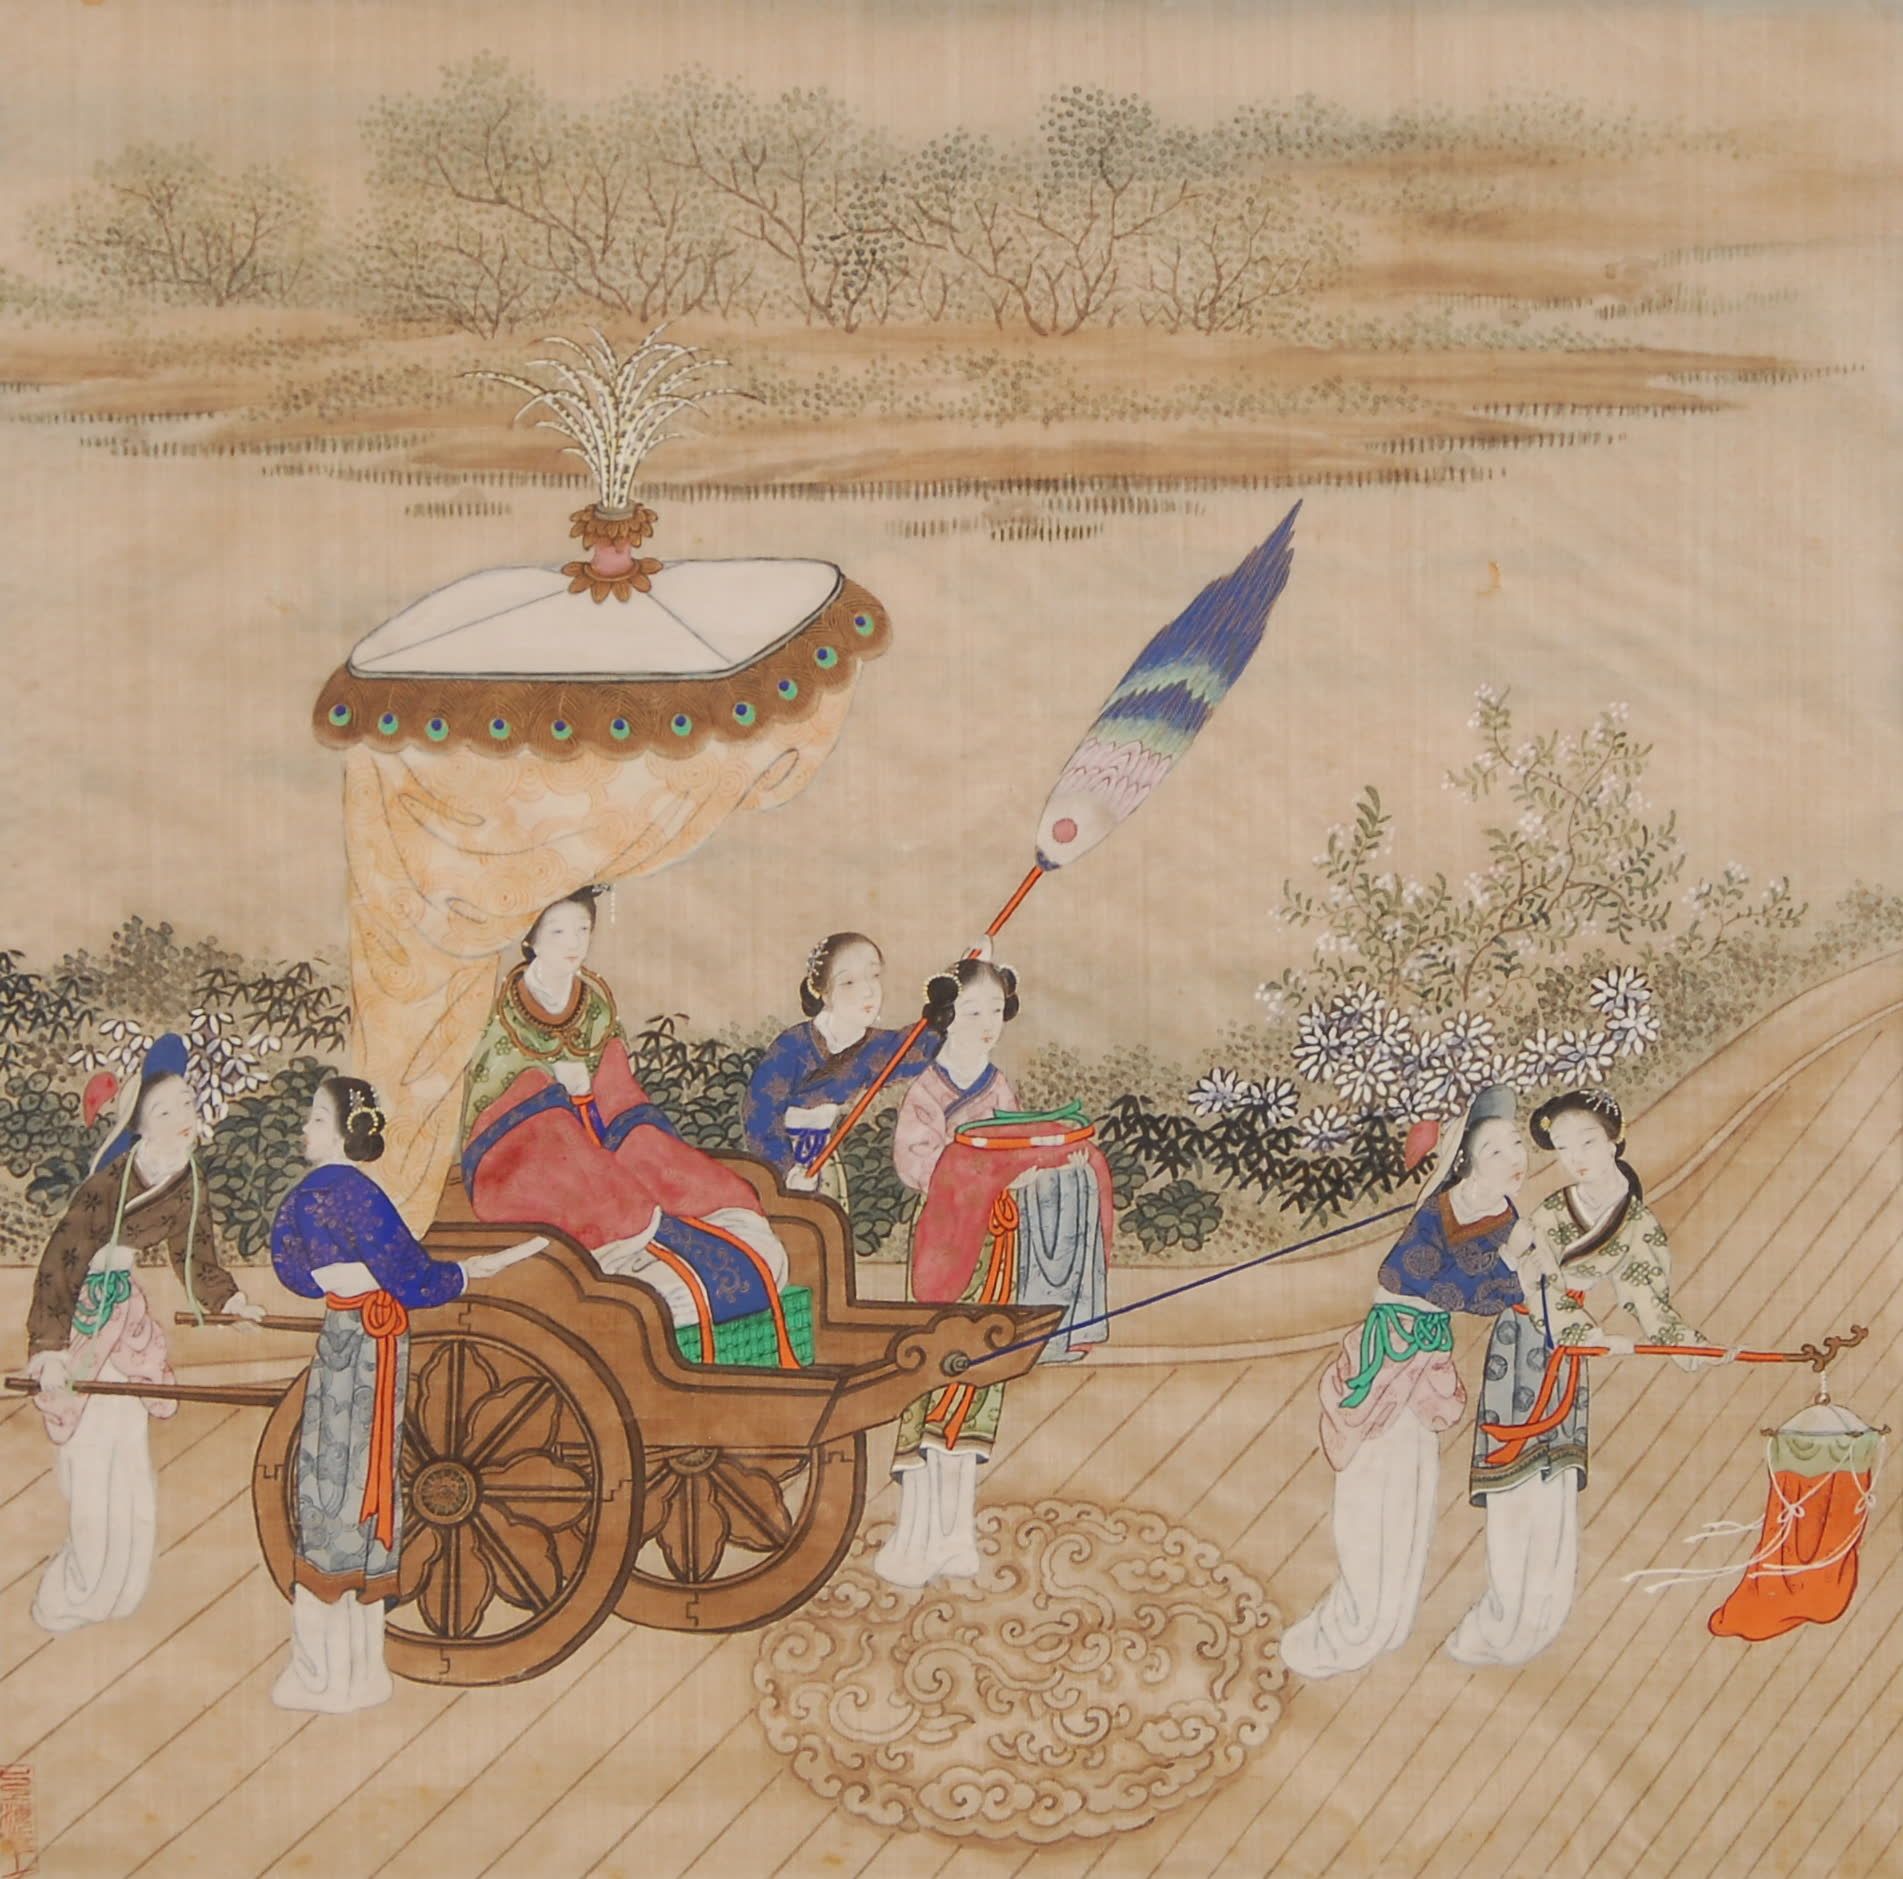 Null Painting on silk.
China, mark.
38,5 x 38,5 cm.